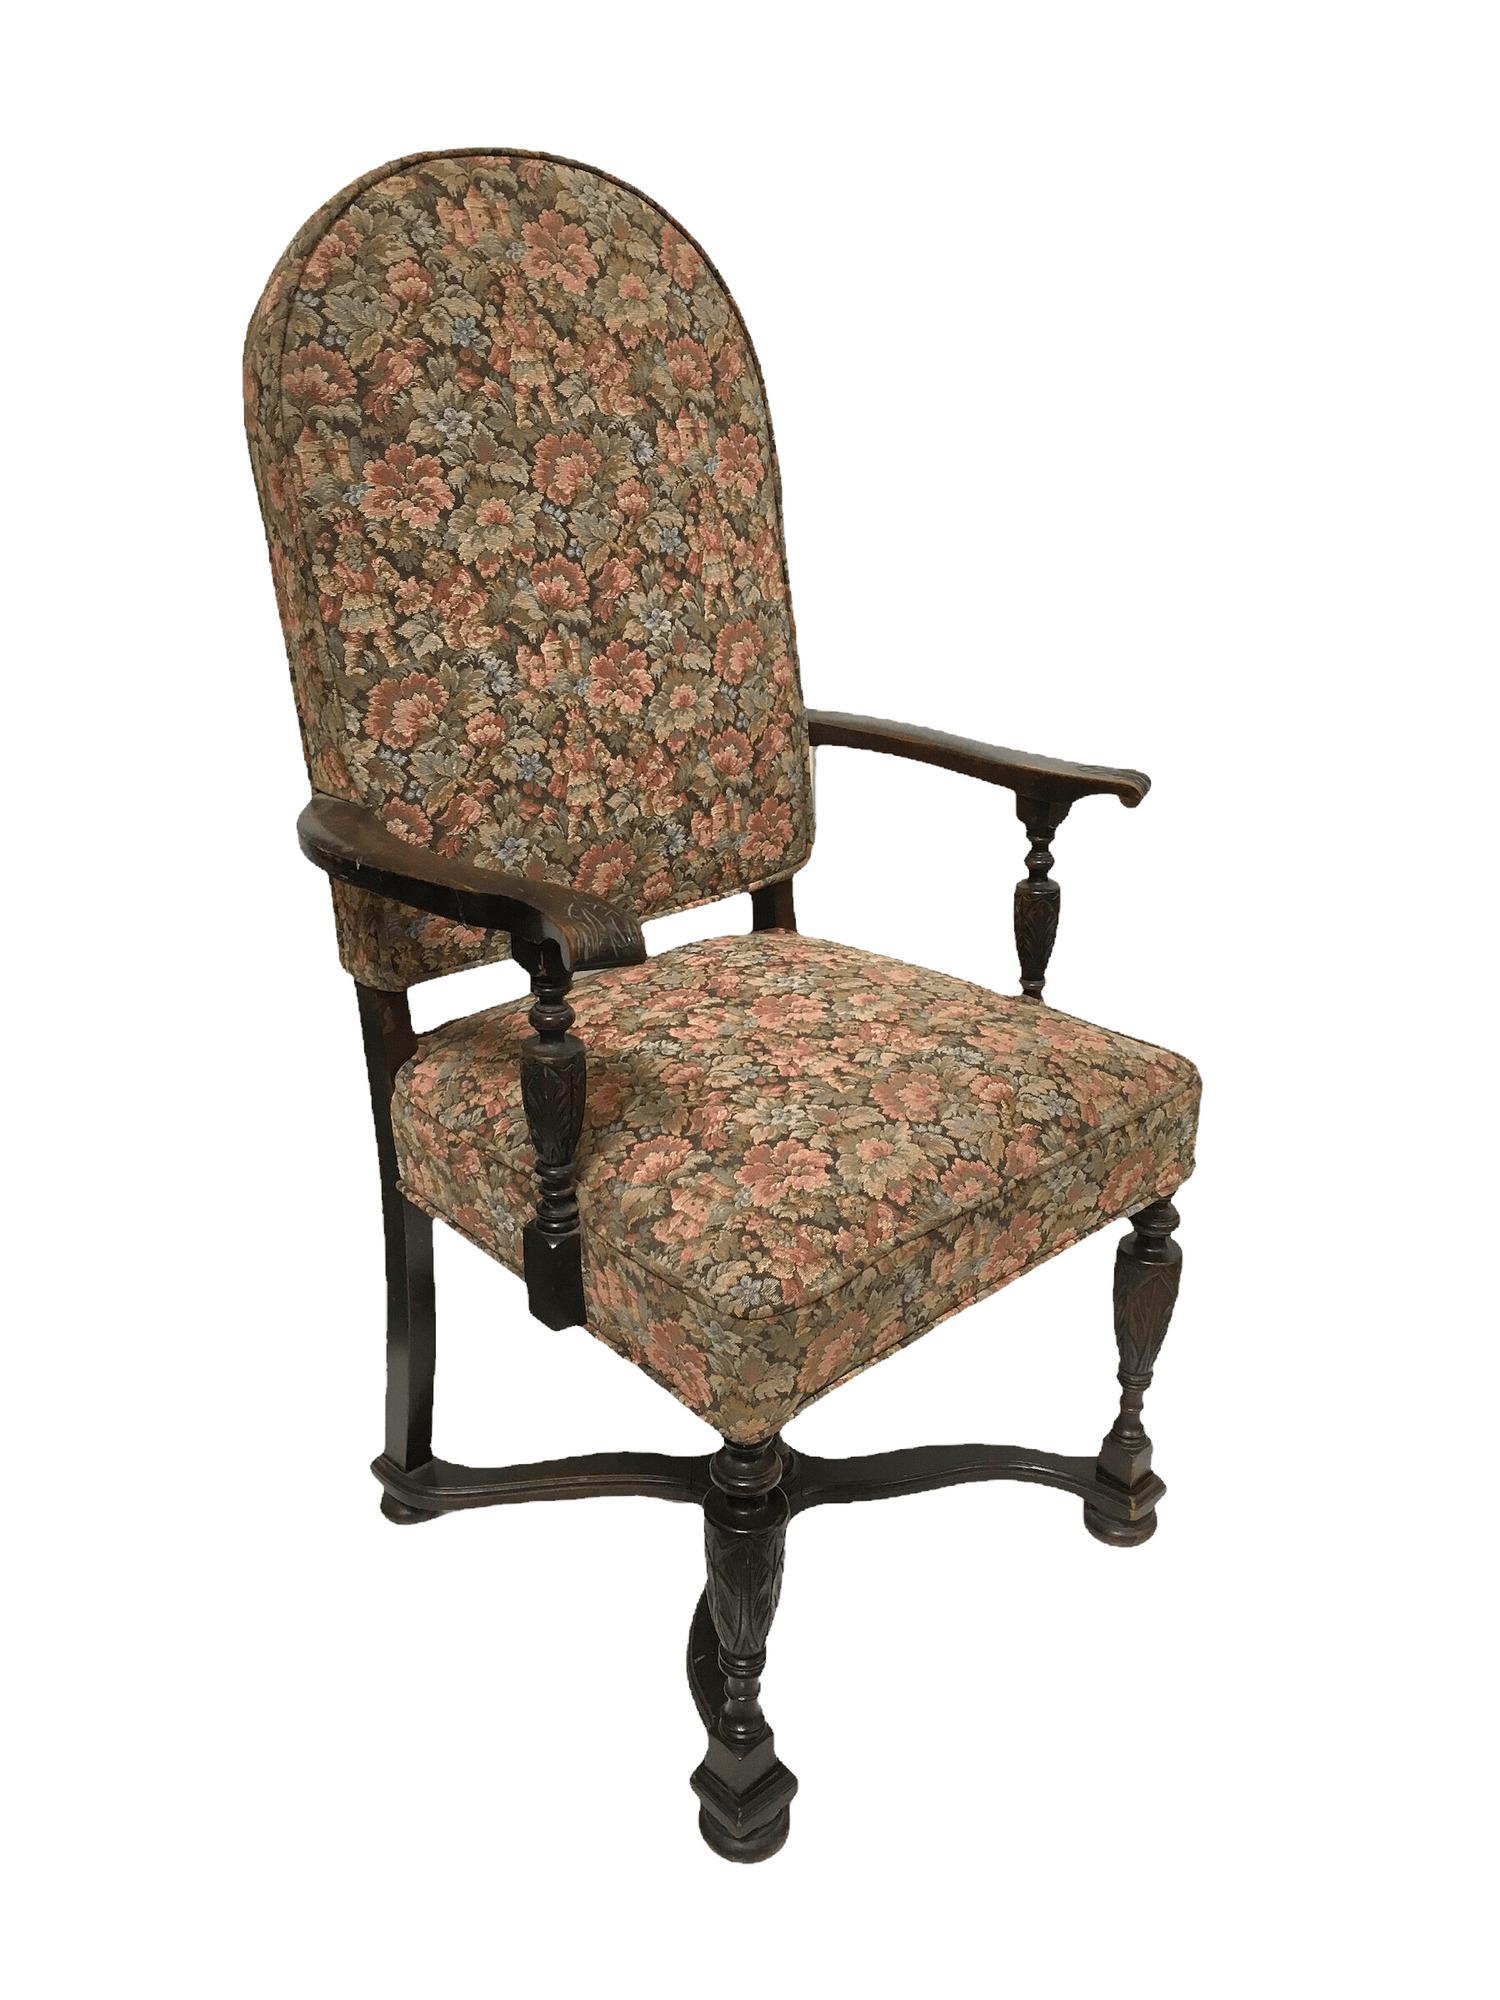 American Antique Walnut Throne Armchair with French Tapestry and Carved Wood, 19th XIX For Sale